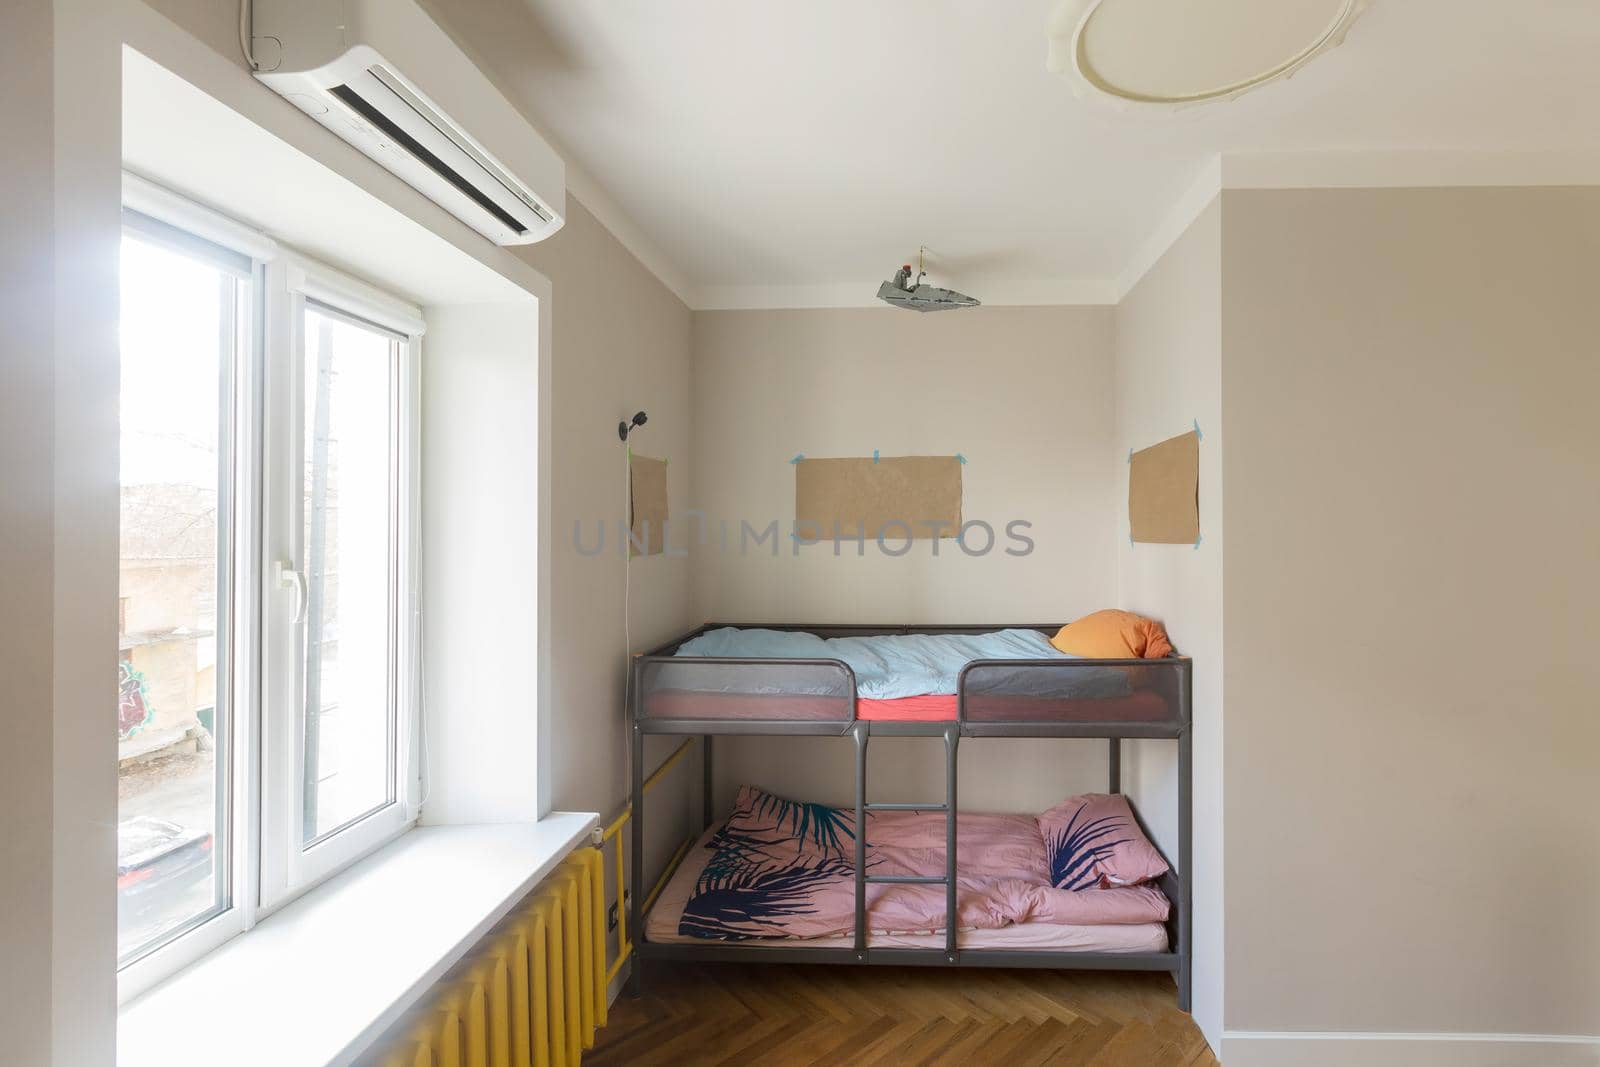 Fragment of modern home interior with bunk bed placed in niche near window in contemporary small apartment with minimalist style design. Children's room